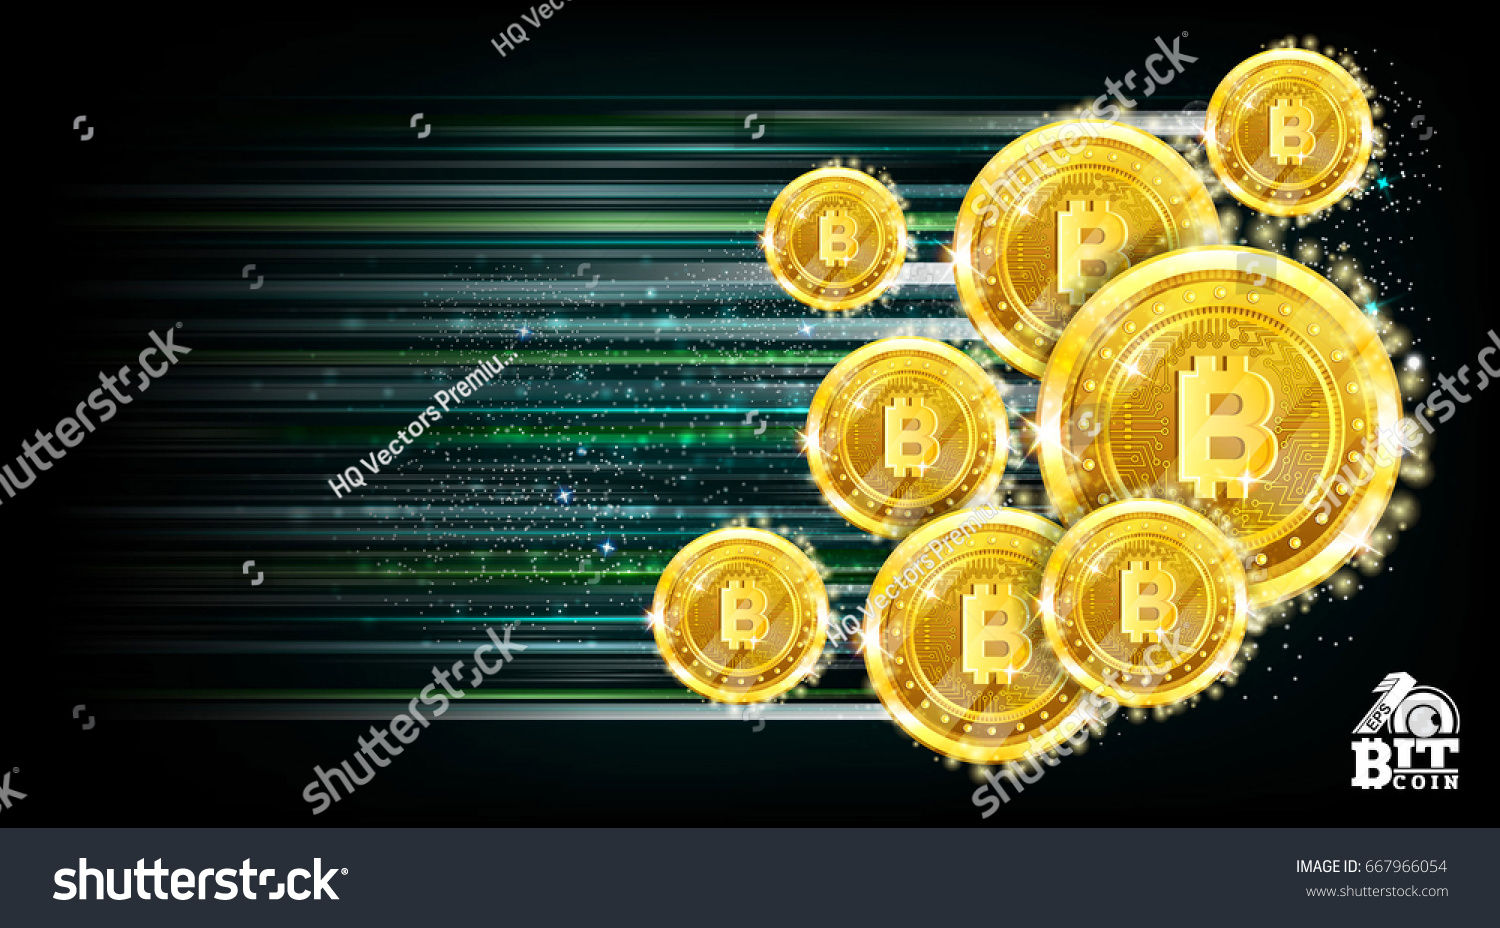 SVG of Horizontal background with bit coins flying with speed of light and motion track back for it svg